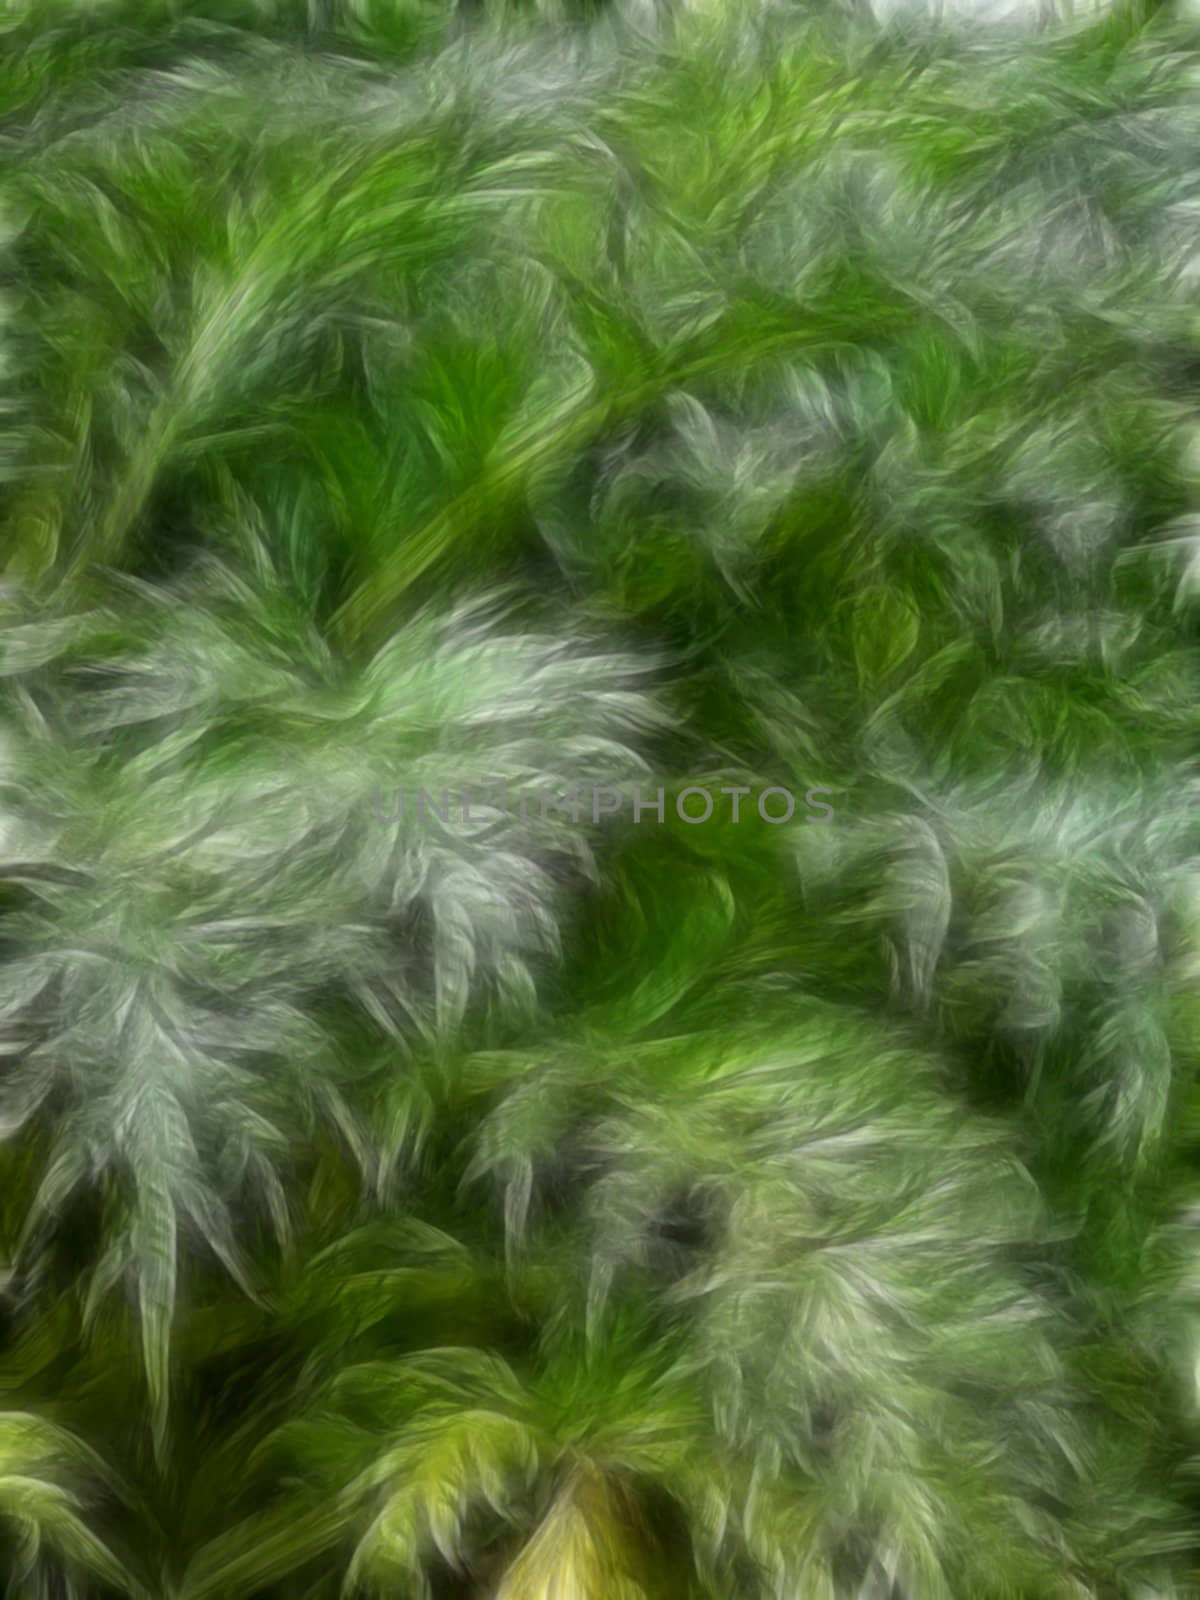 Abstract illustration of green plant life